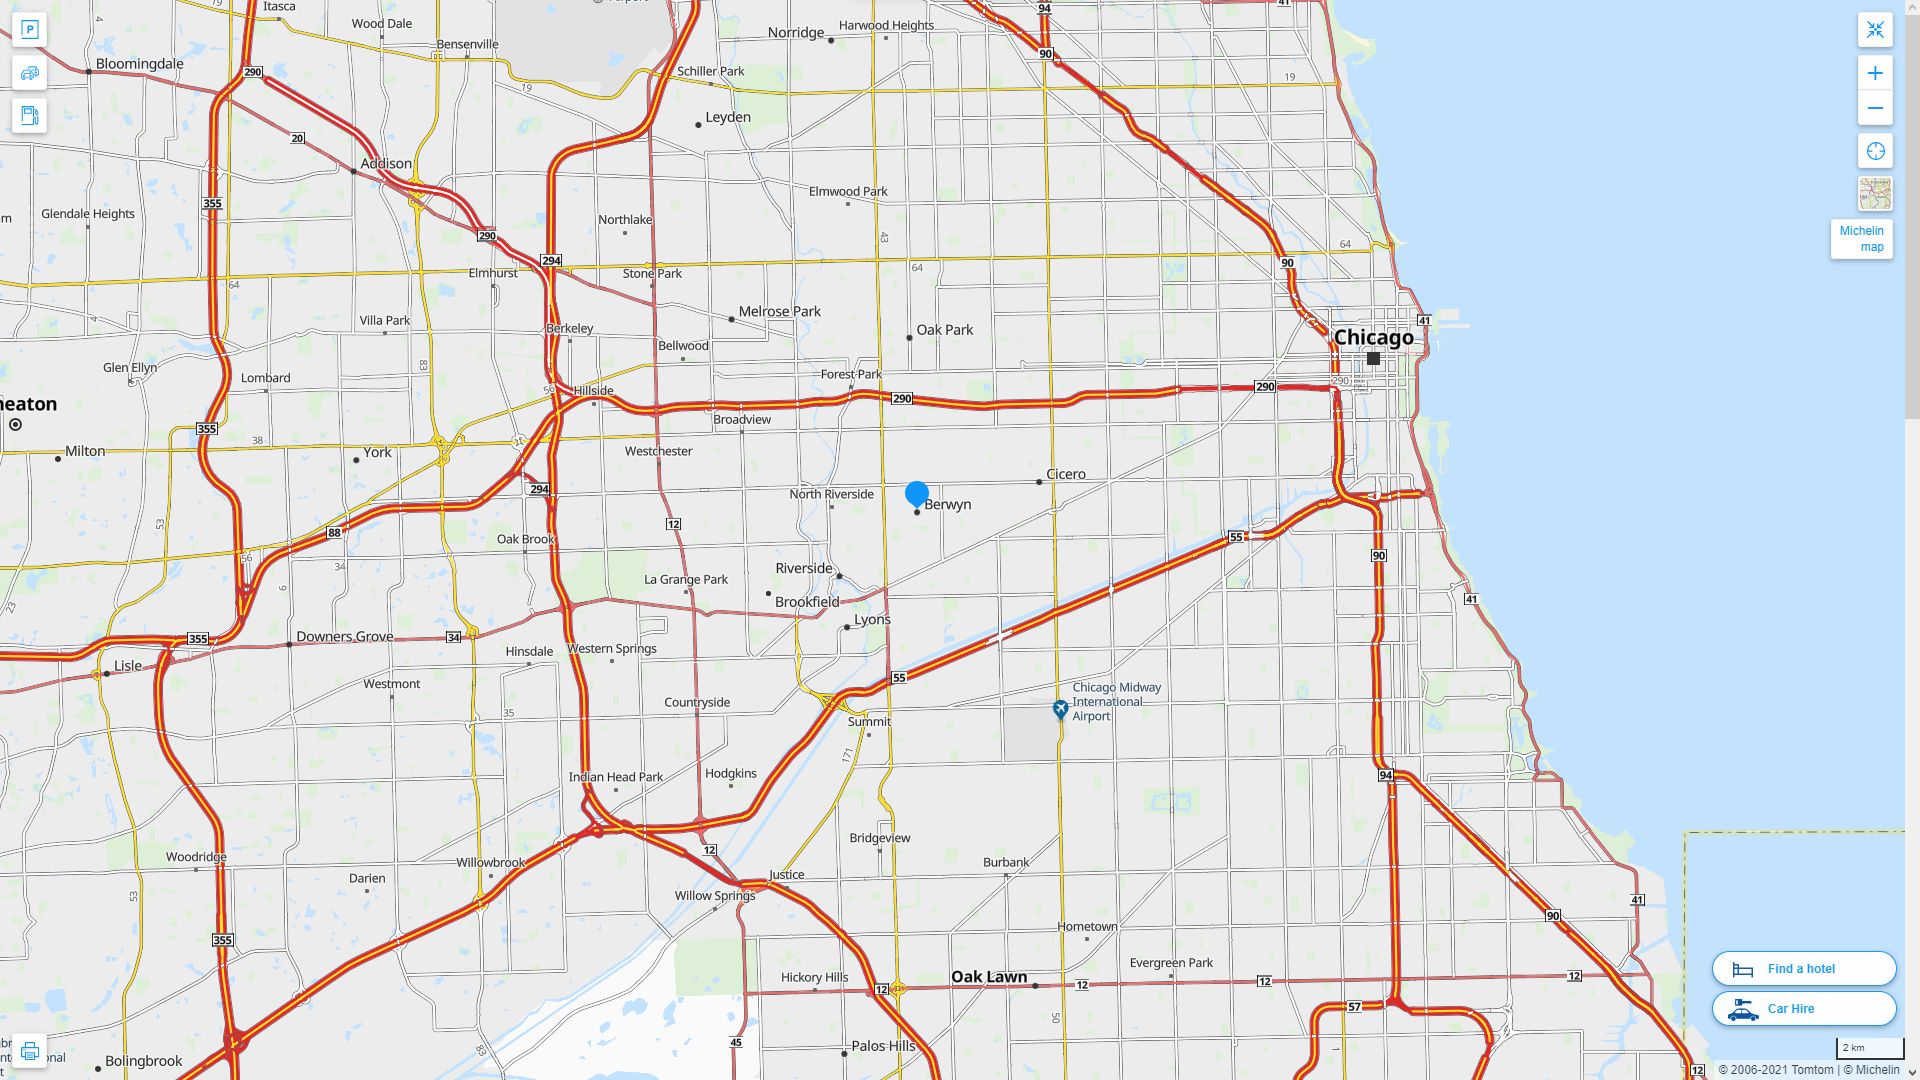 Berwyn illinois Highway and Road Map